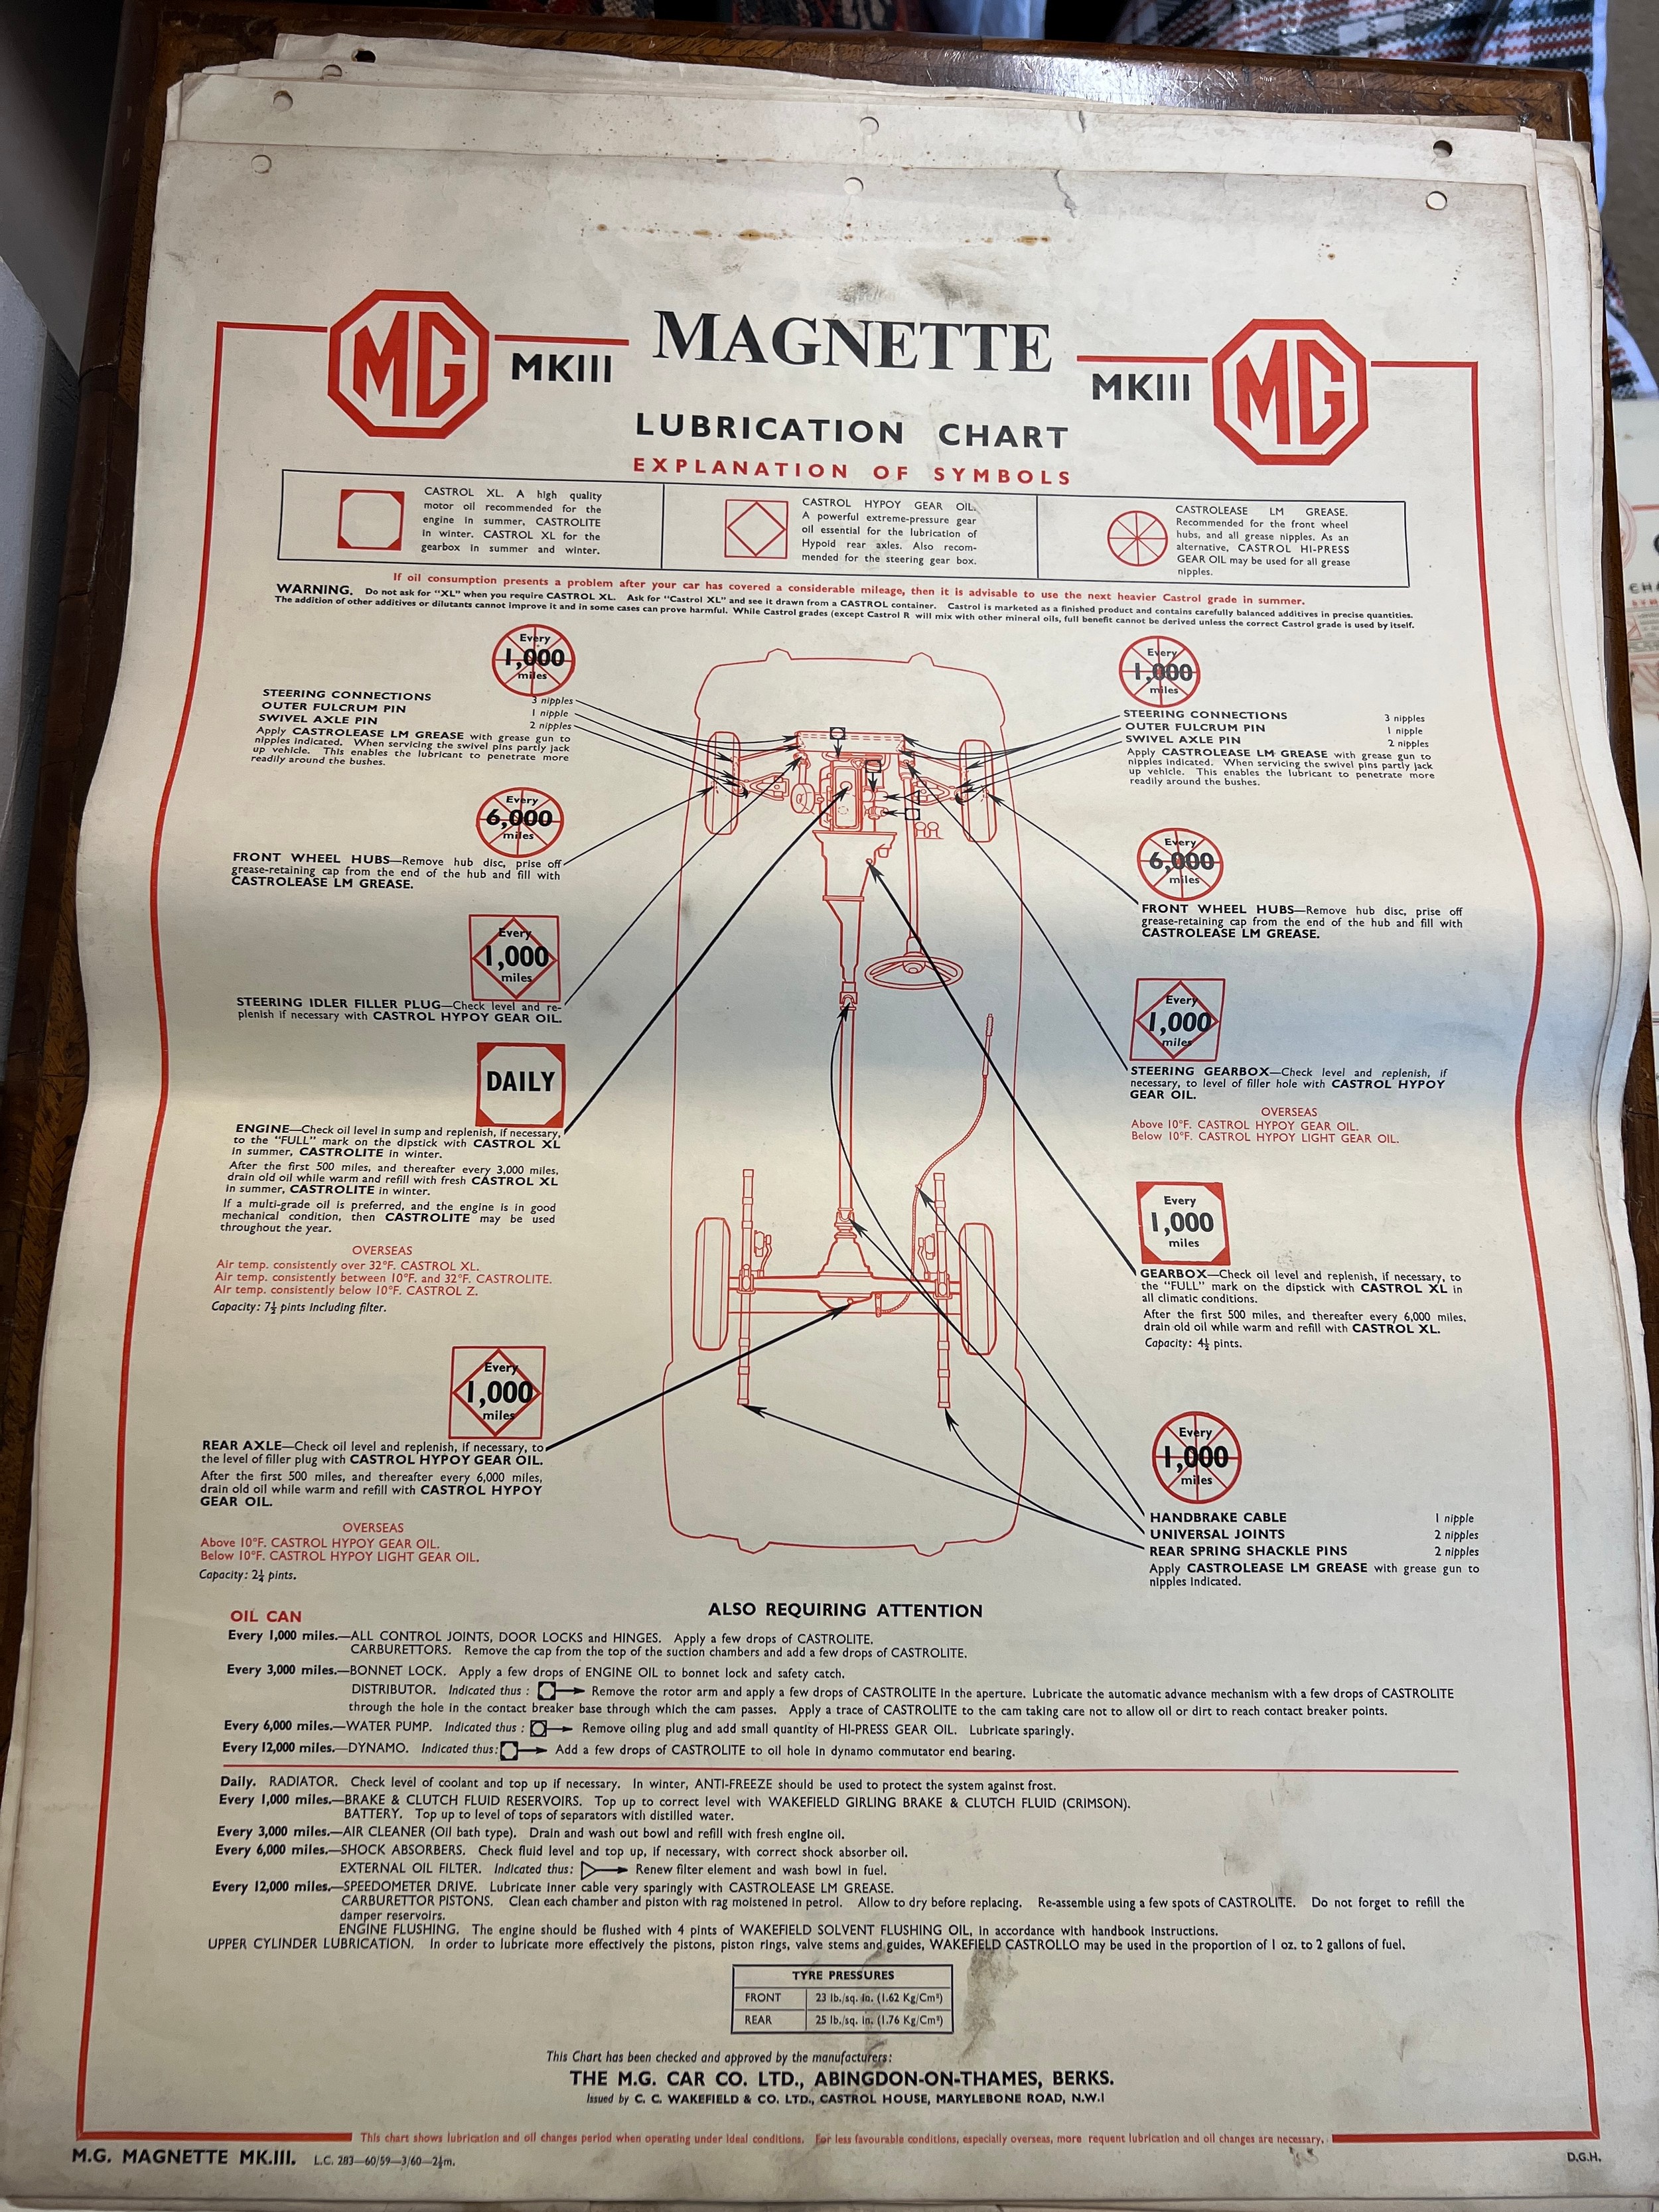 Thirty one vintage car lubrication charts to include Wolseley, Morris, MG 1100, Morris 1100, - Image 13 of 31